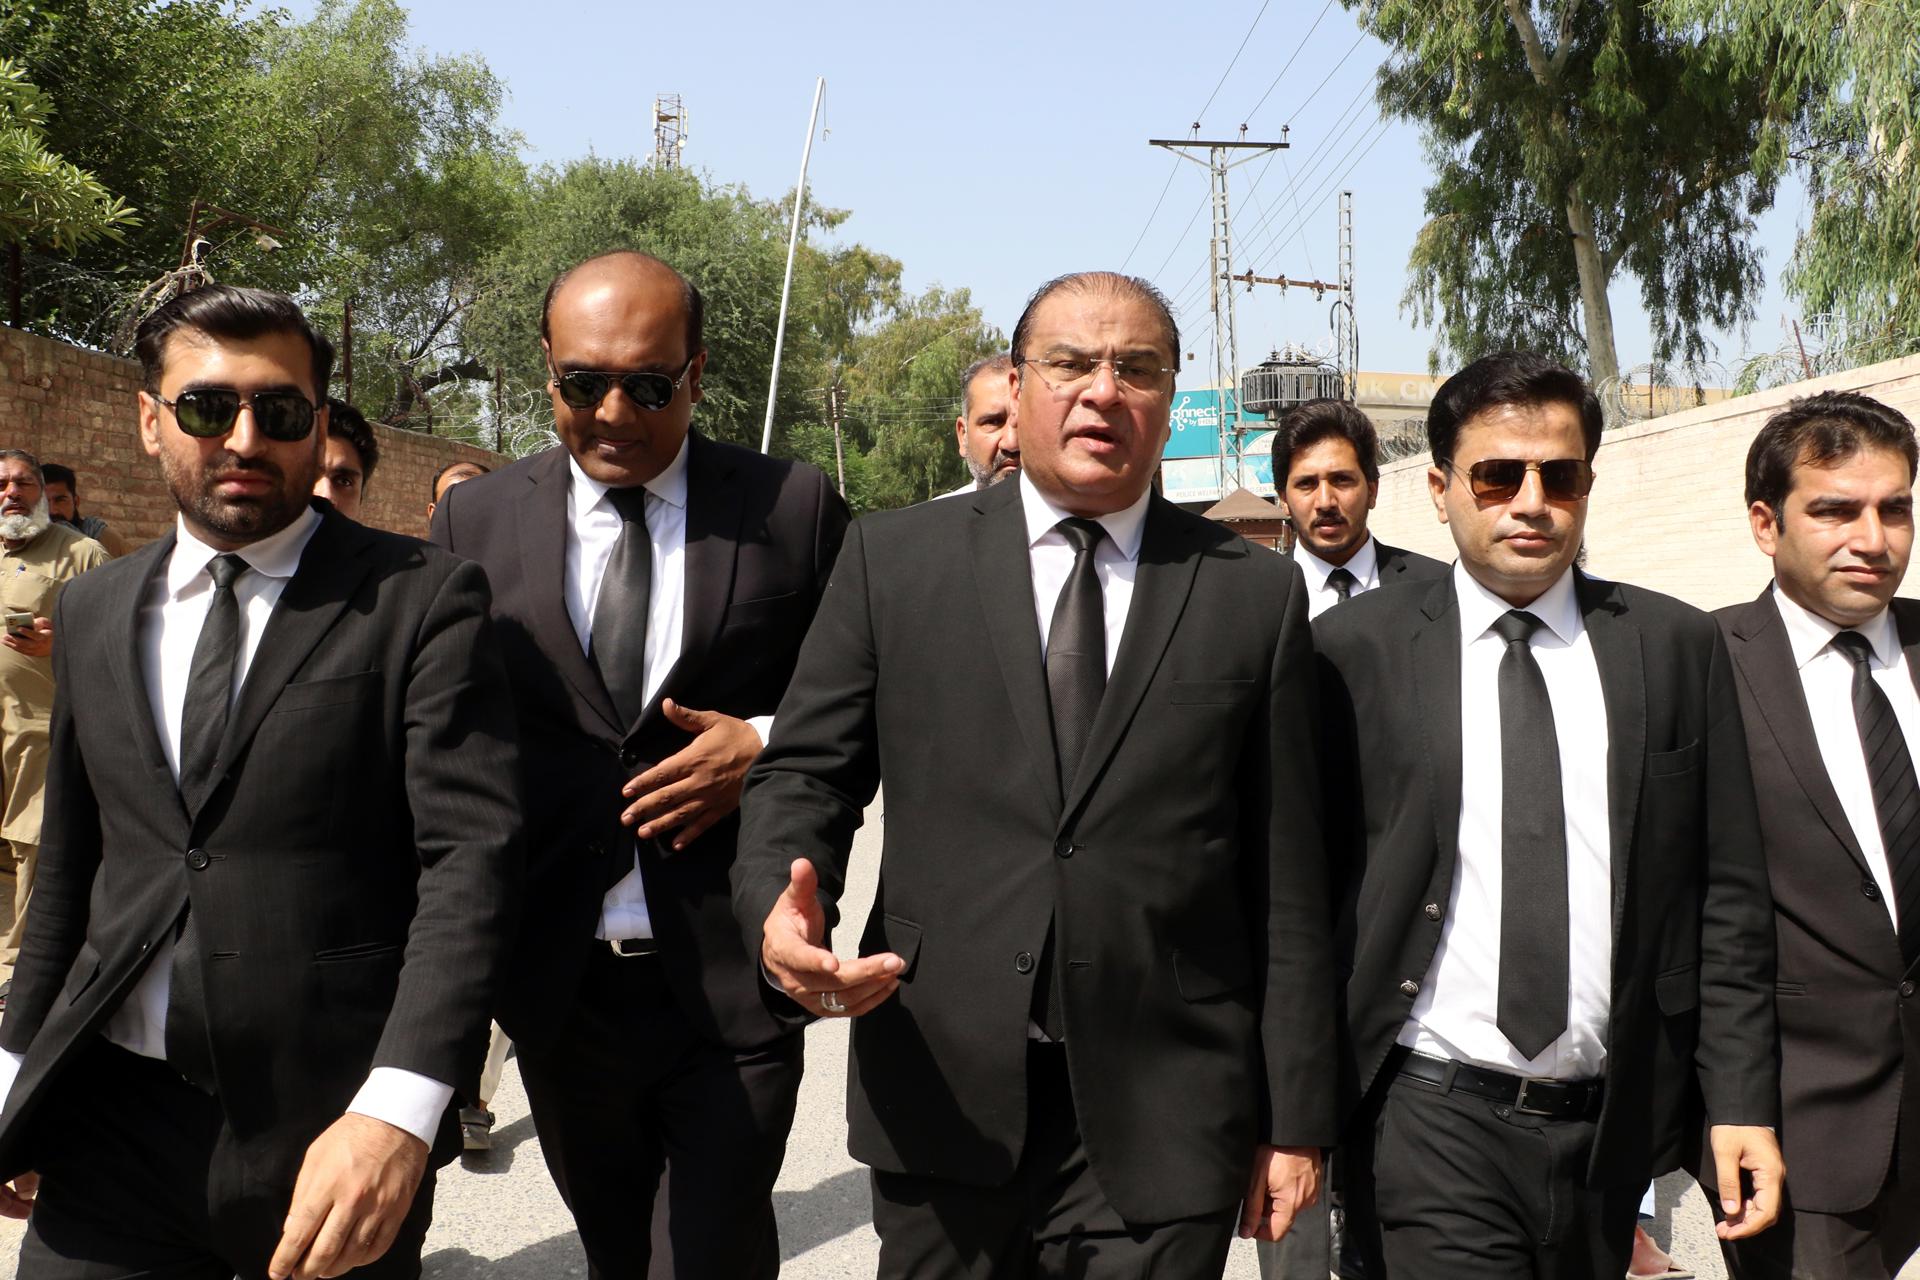 Intezar Panjutha (2-L), Naeem Panjutha (2-R) and other members of the legal team of Imran Khan, the former prime minister and chairman of Pakistan Tehrik-e-Insaf (PTI) political party, arrive to attend a hearing at a prison, in Attock, Pakistan, 30 August 2023. EFE-EPA/SOHAIL SHAHZAD
